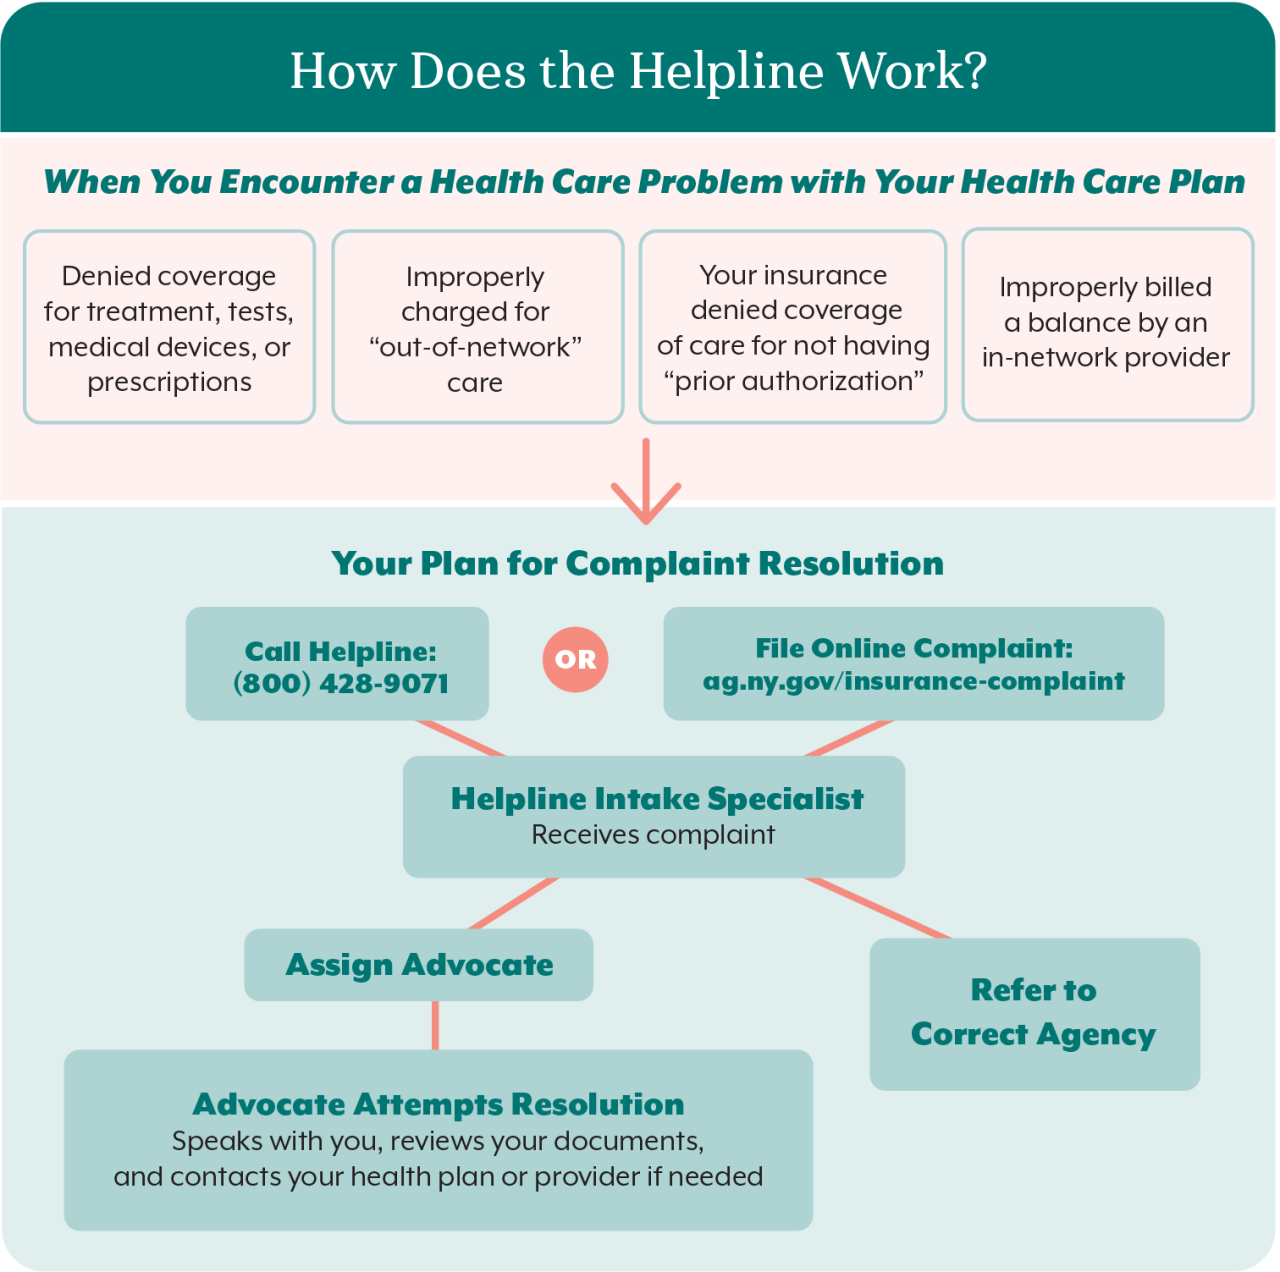 A visual representation of the Health care help line process described on the page